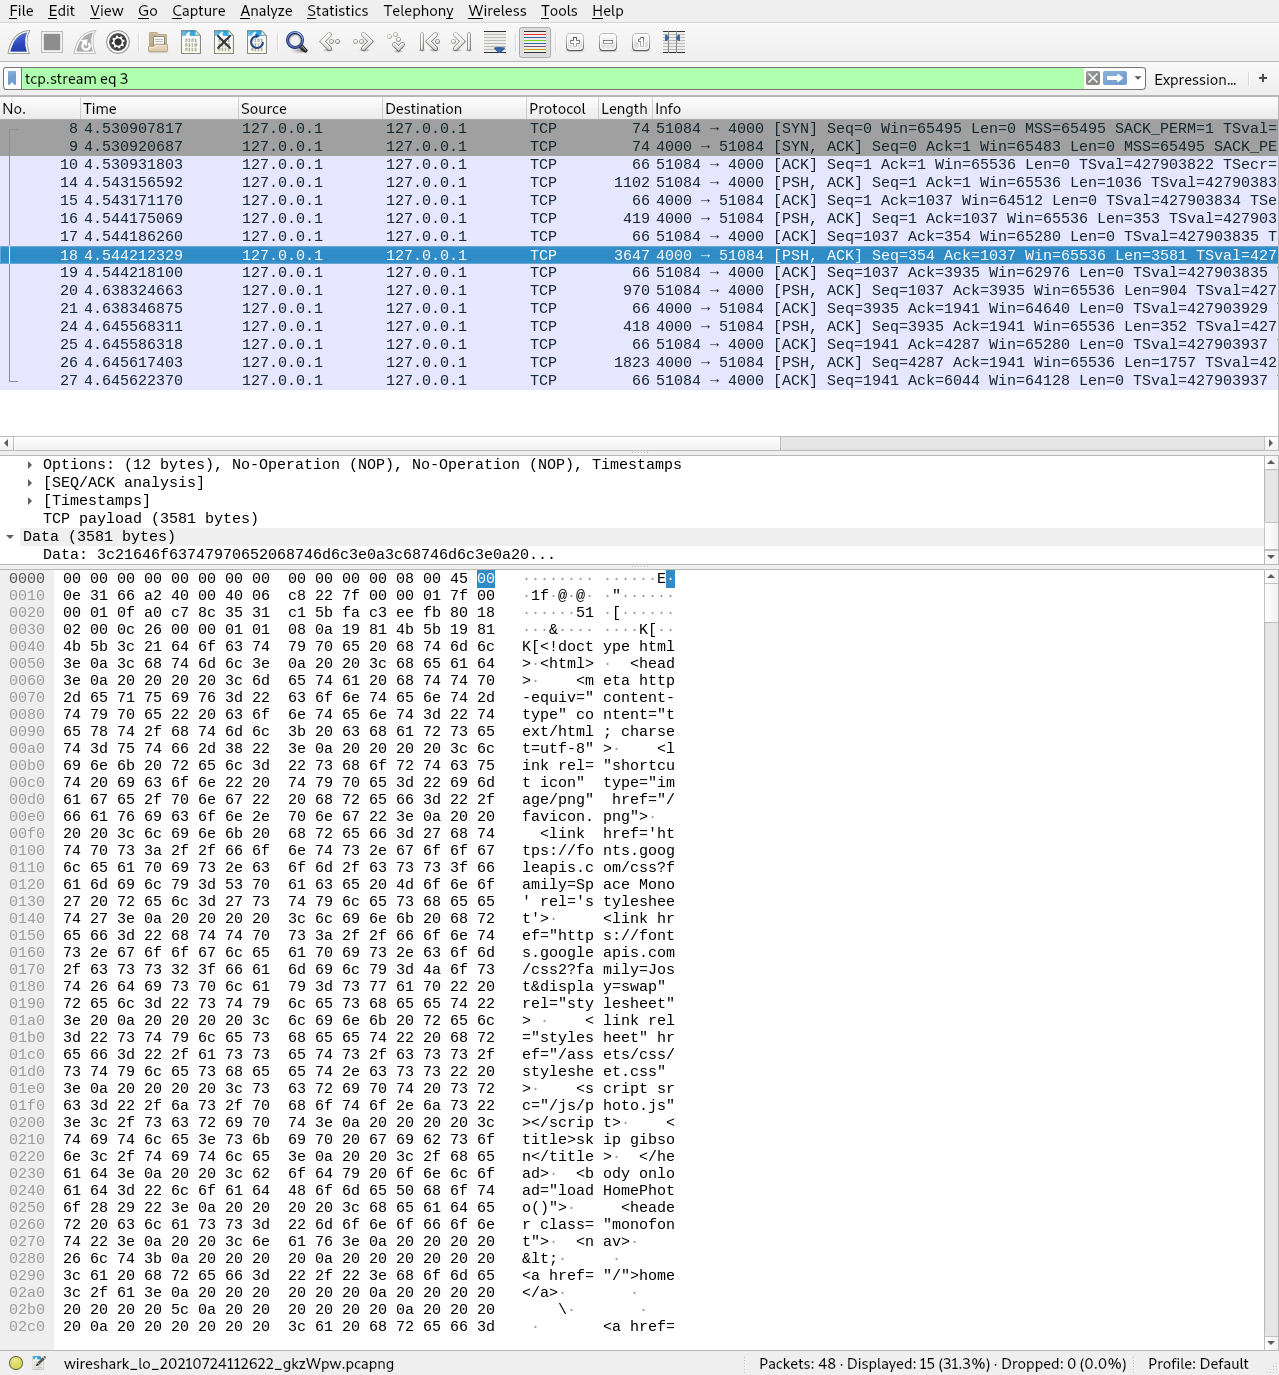 A screenshot of Wireshark showing an HTTP request and the information in plain text